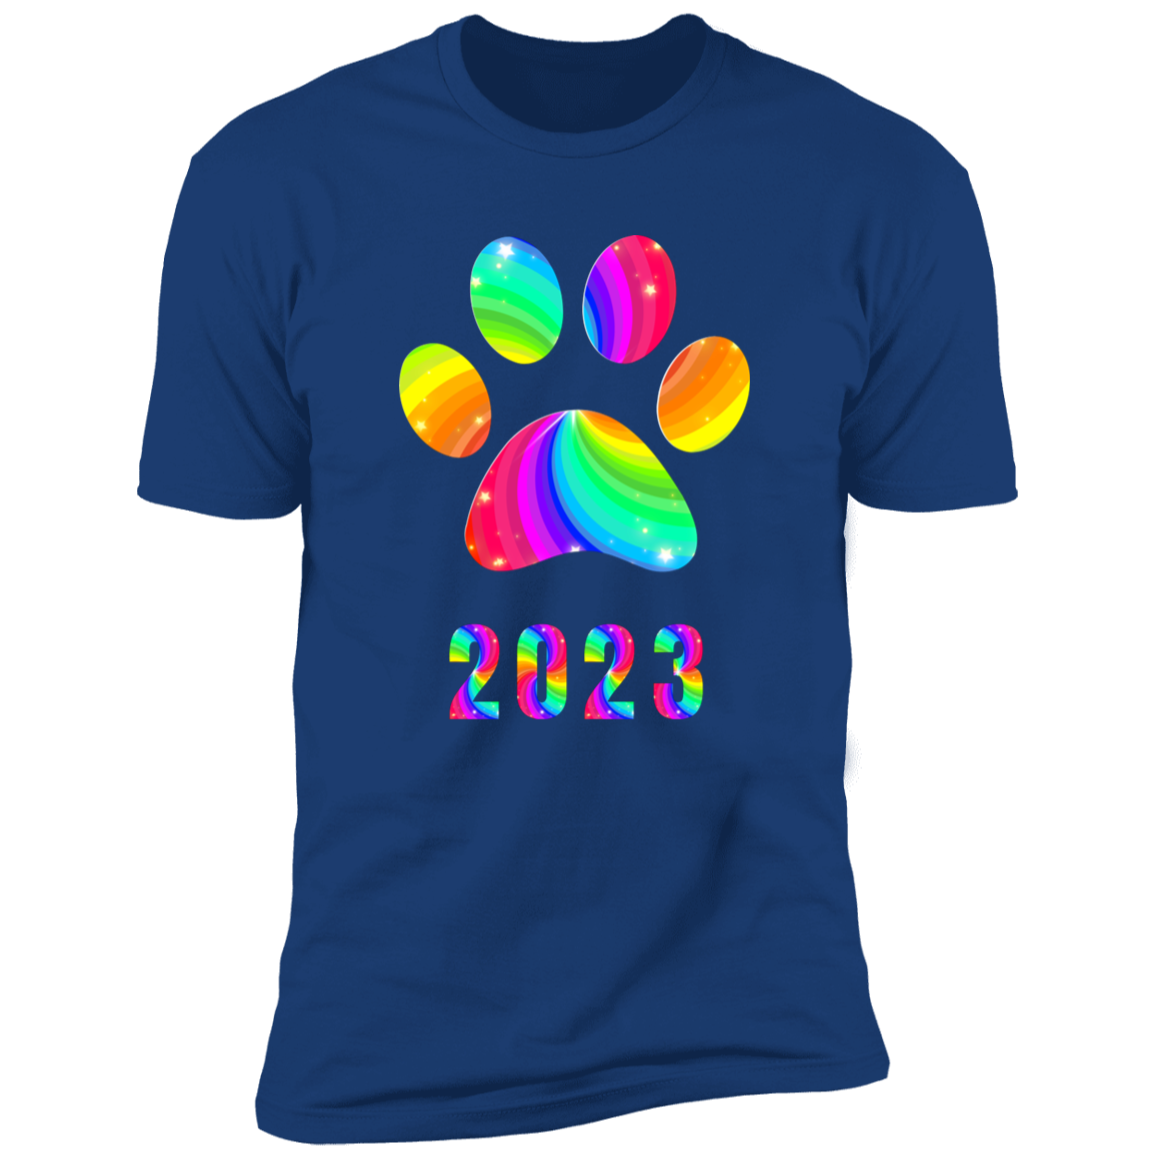 Pride Paw 2023 (Swirl) Pride T-shirt, Paw Pride Dog Shirt for humans, in royal blue